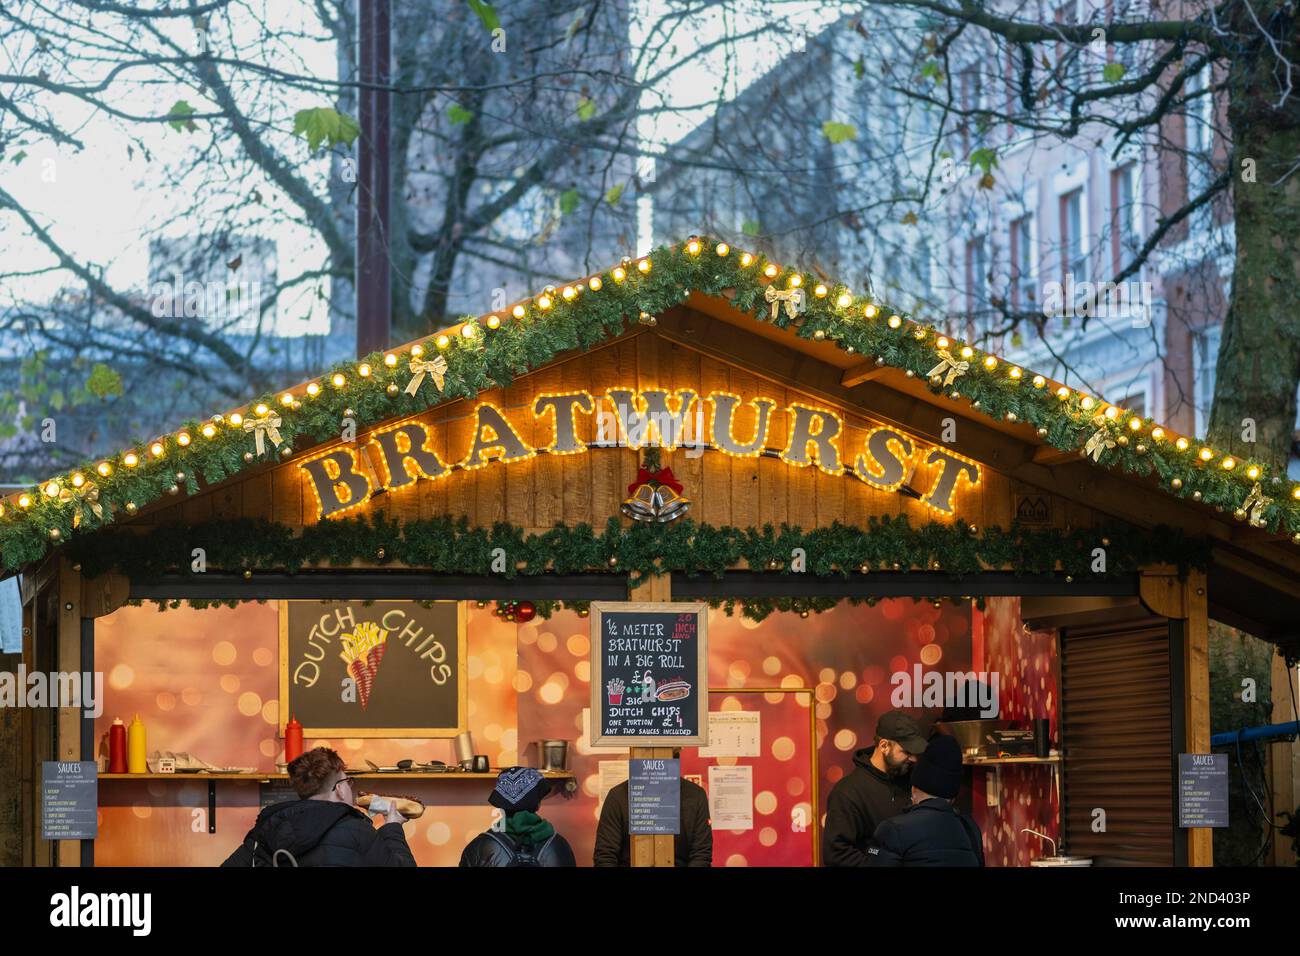 Closeup of illuminated sign of a bratwurst stall in a wooden alpine style chalet at the Manchester Christmas Markets. Manchester. UK Stock Photo